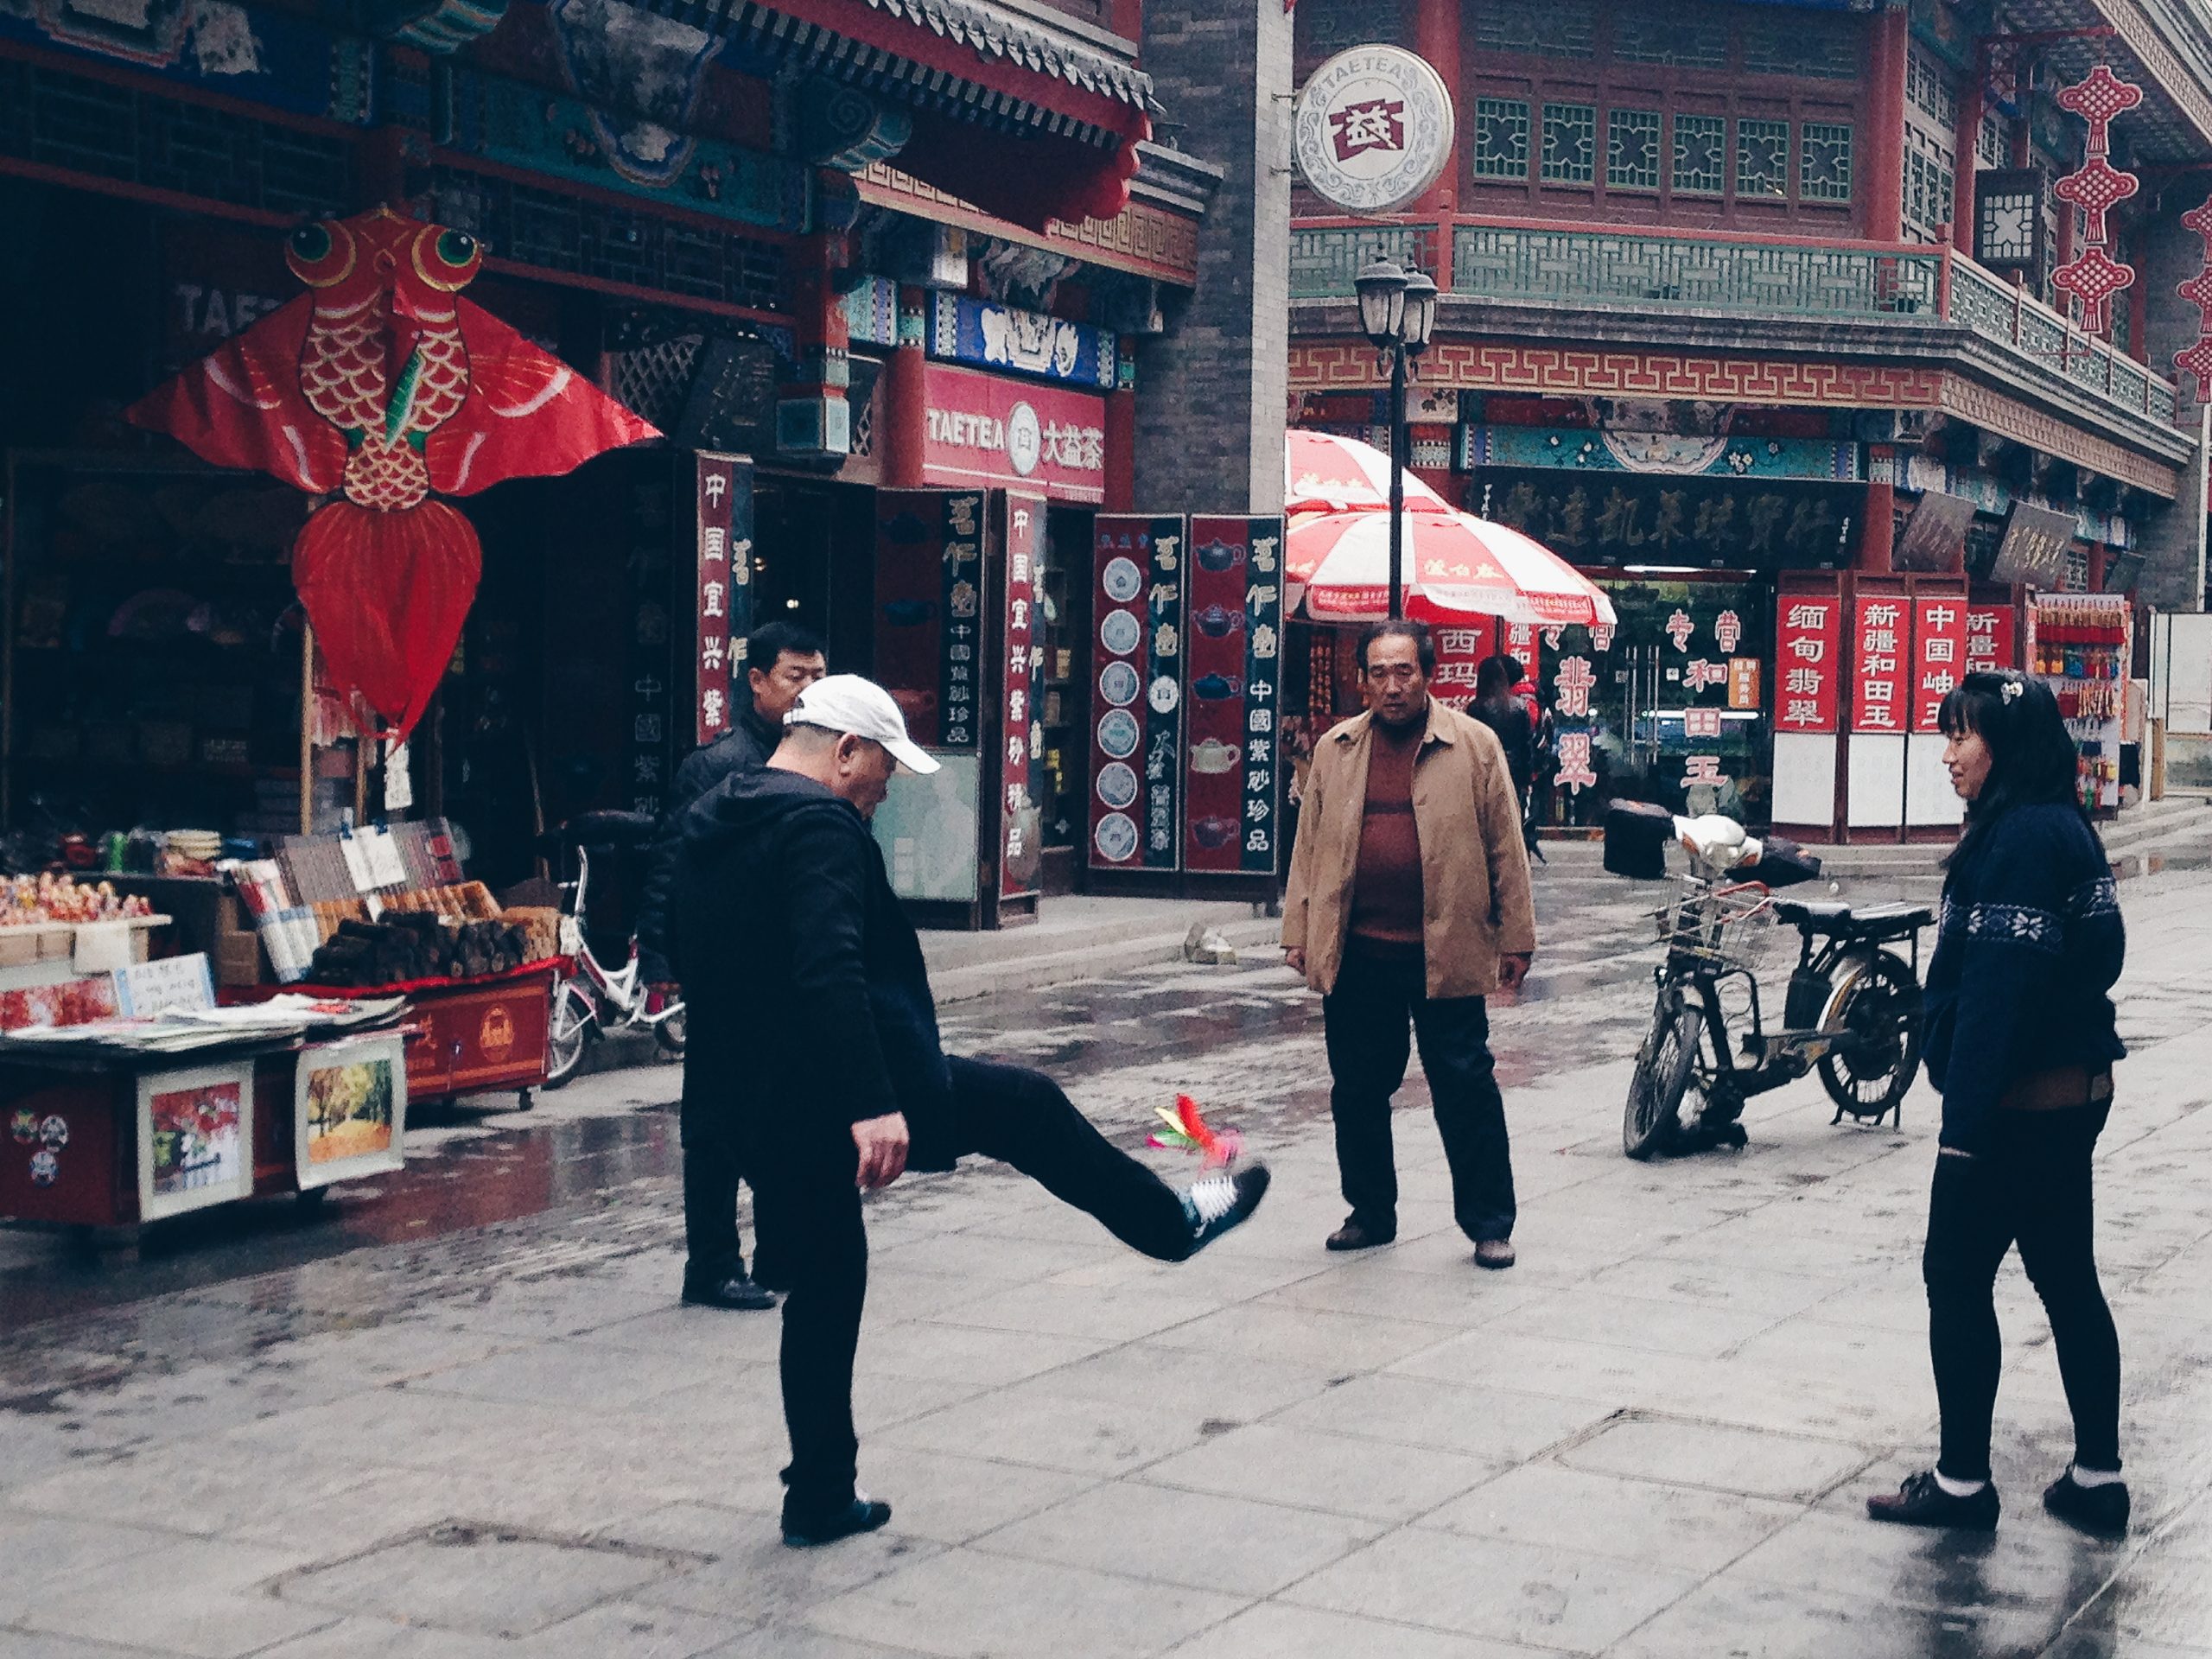 A friendly game of jianzi on Ancient Cultural Street